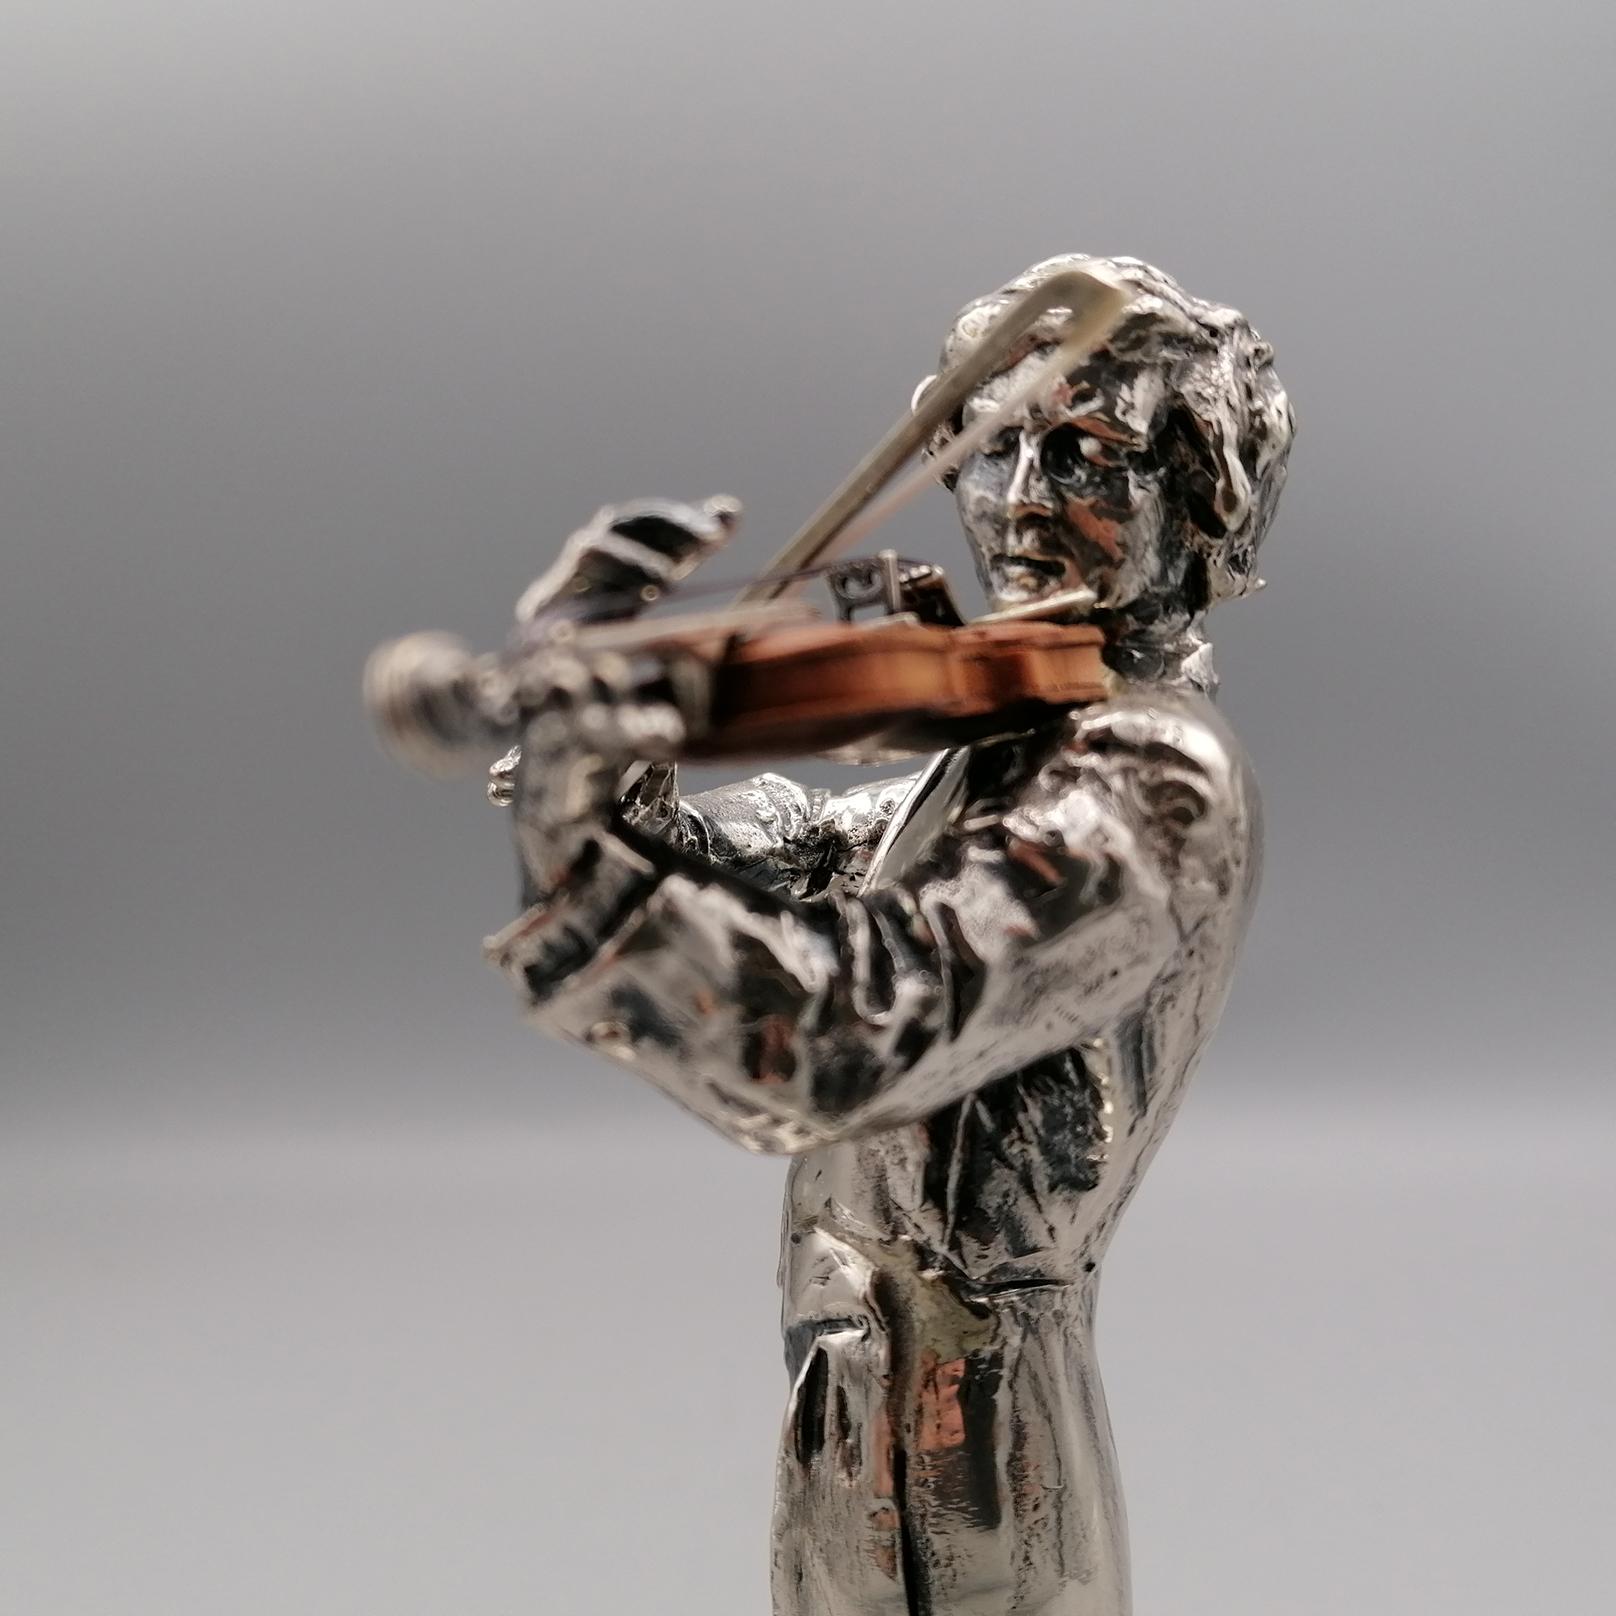 2oth Century Italian Solid Silver Violinist statue with wooden violin For Sale 3